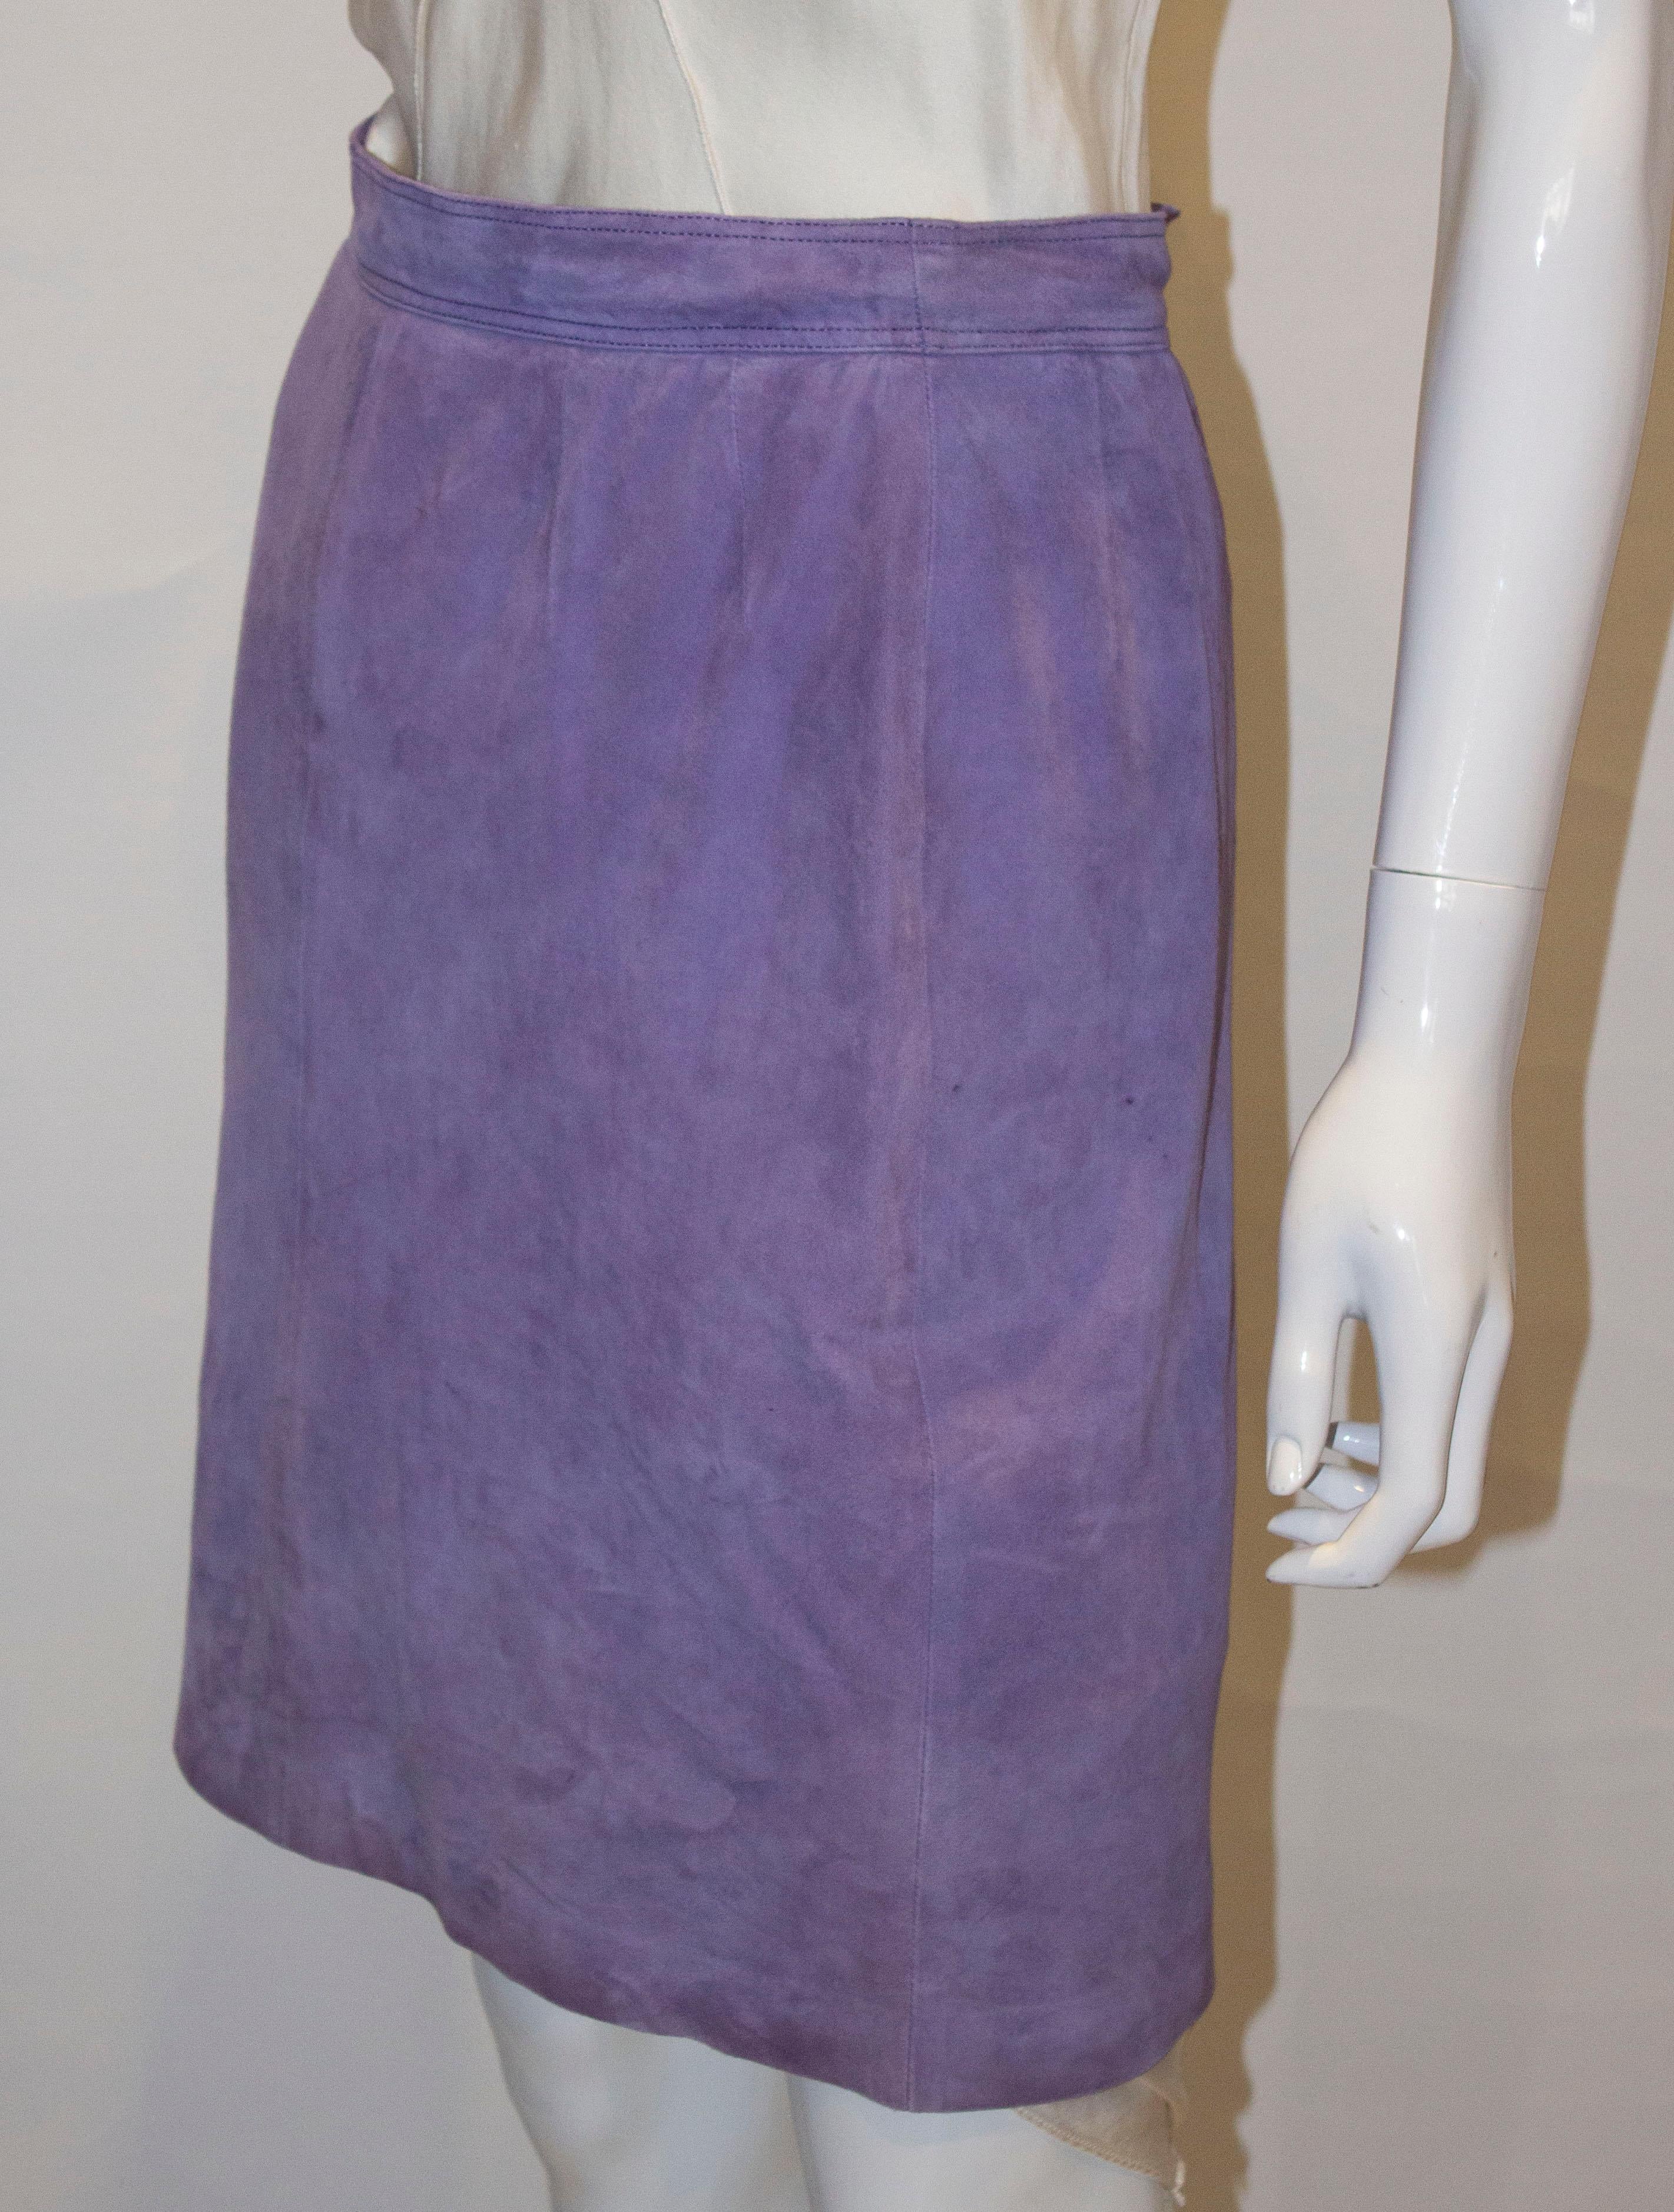 Vintage Loewe Lilac Suede Skirt In Good Condition For Sale In London, GB